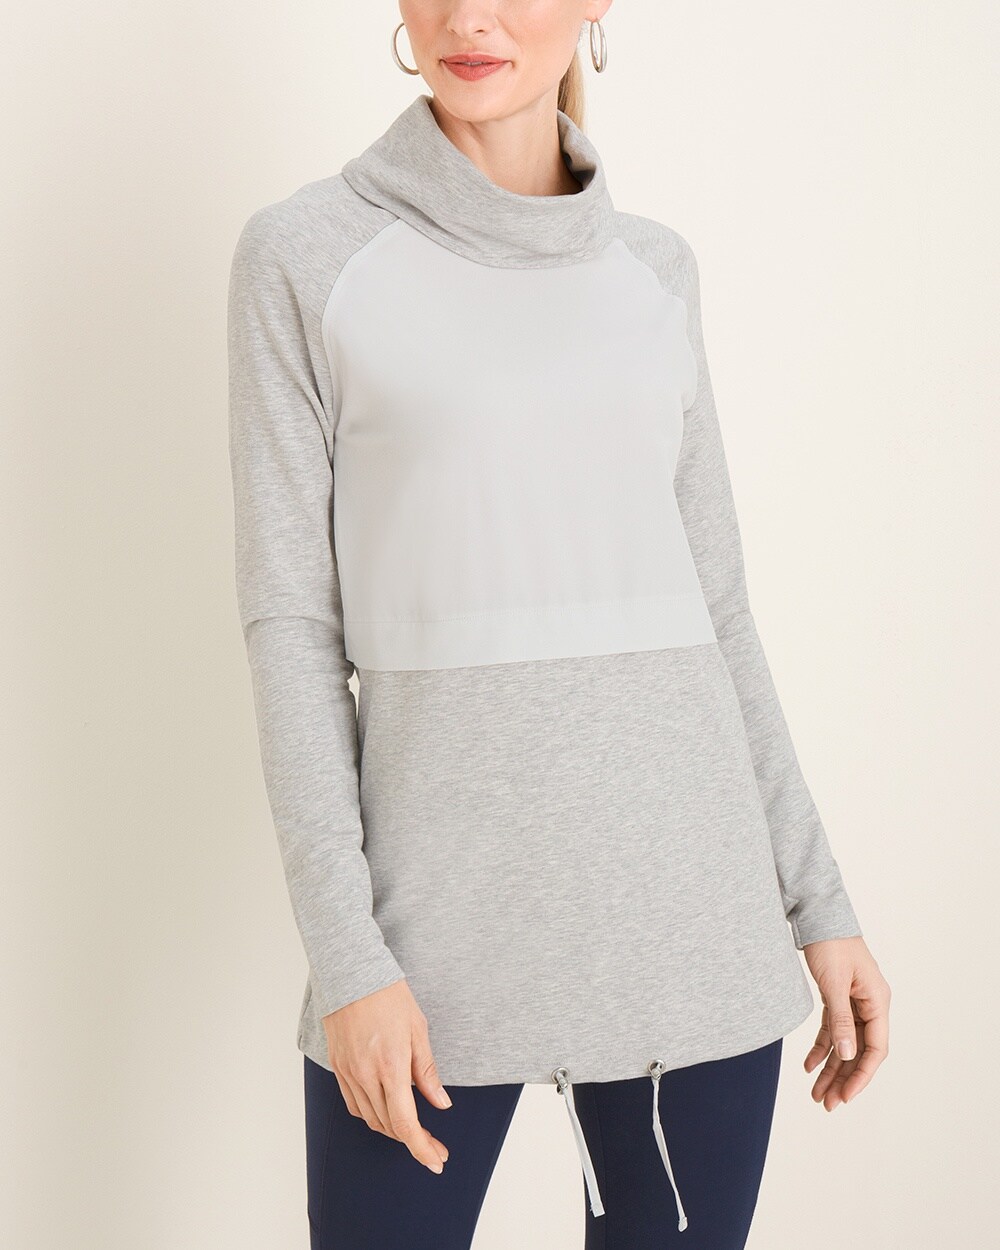 Zenergy Mixed-Knit Pullover